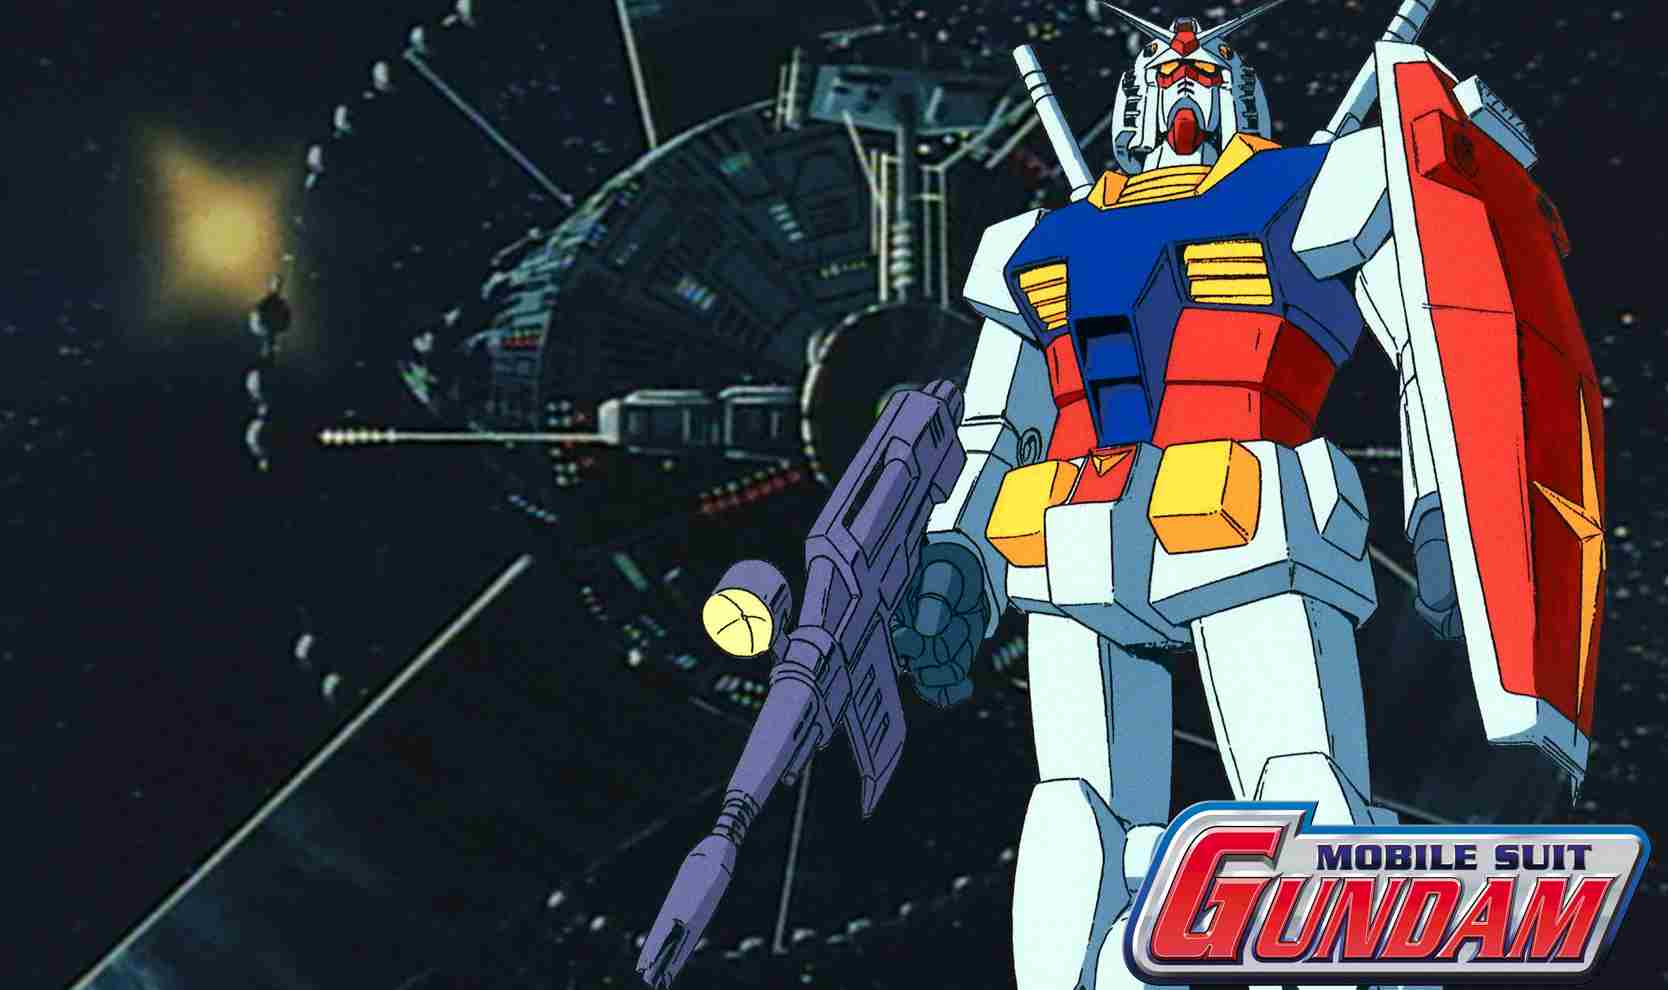 Mobile Suit Gundam – All the Anime